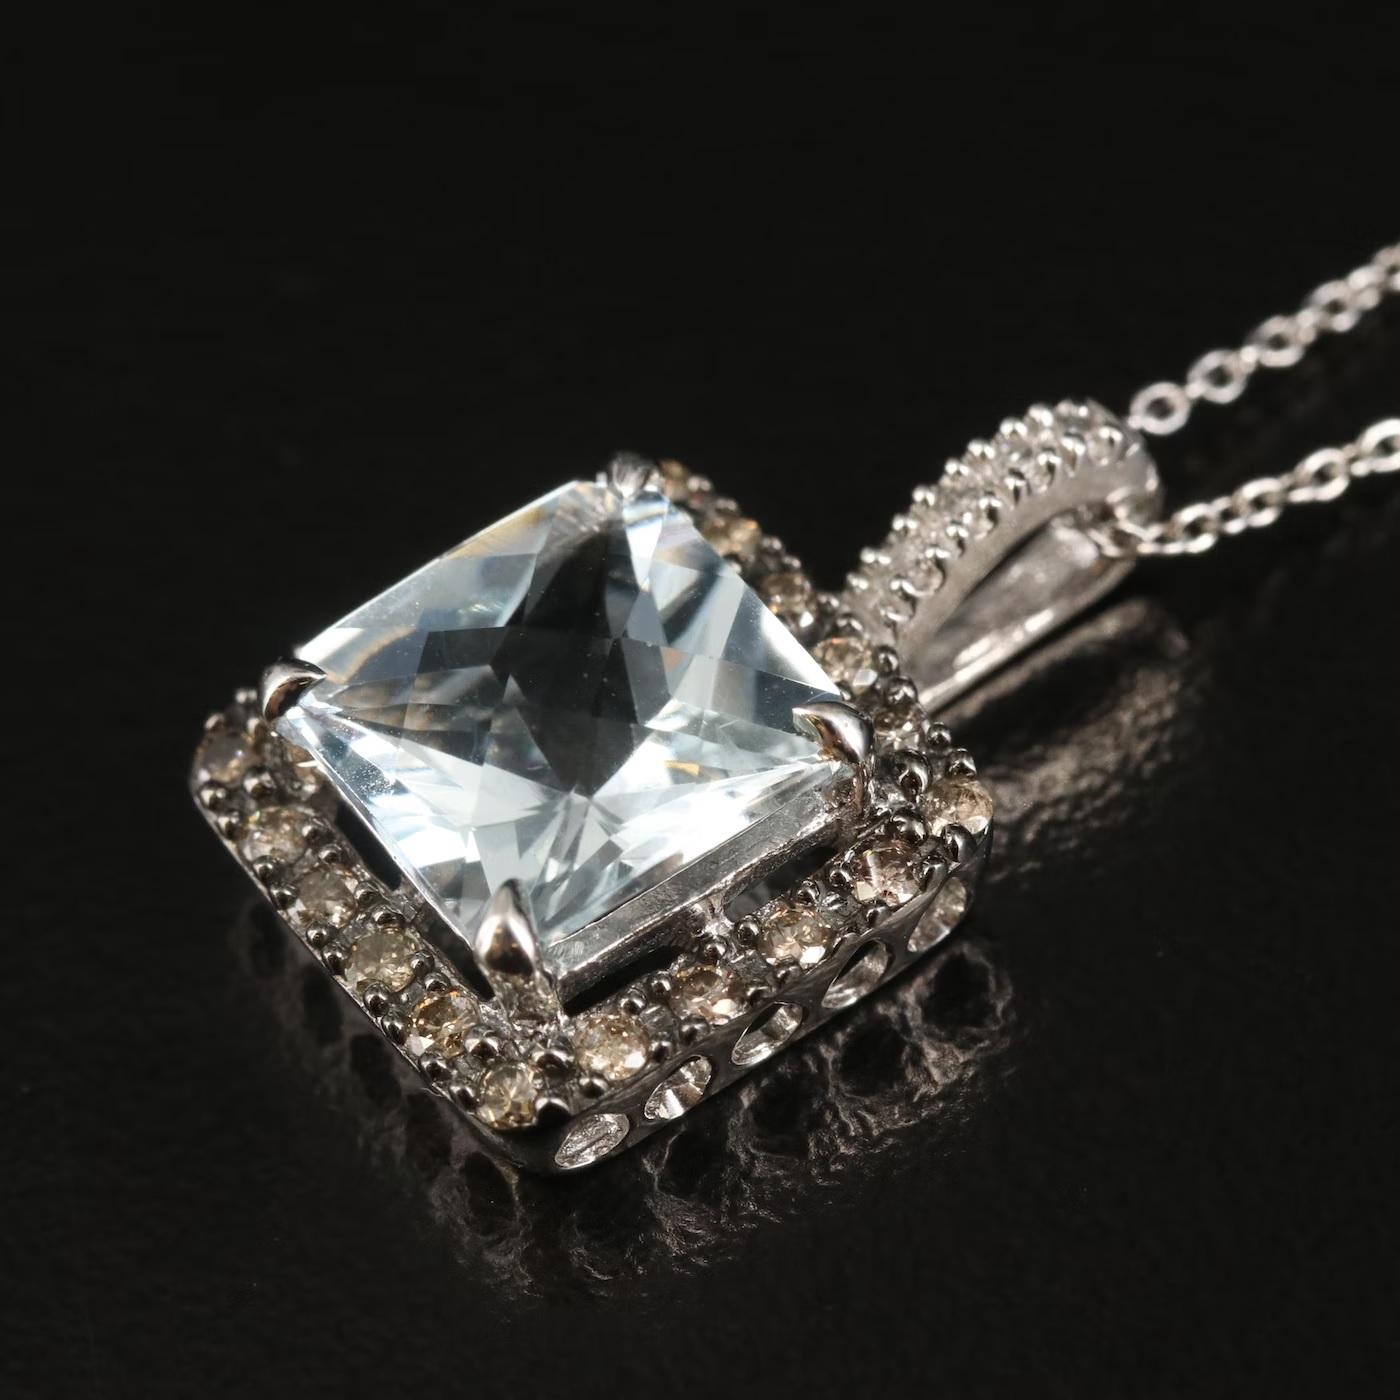 Effy Designer Necklace, stamped and hallmarked

NEW with Tags, Tag price $2700

2.52 CWT Natural Diamond & Natural Aquamarine, TOP QUALITY 

14K Gold, stamped 14K

Comes with gift box